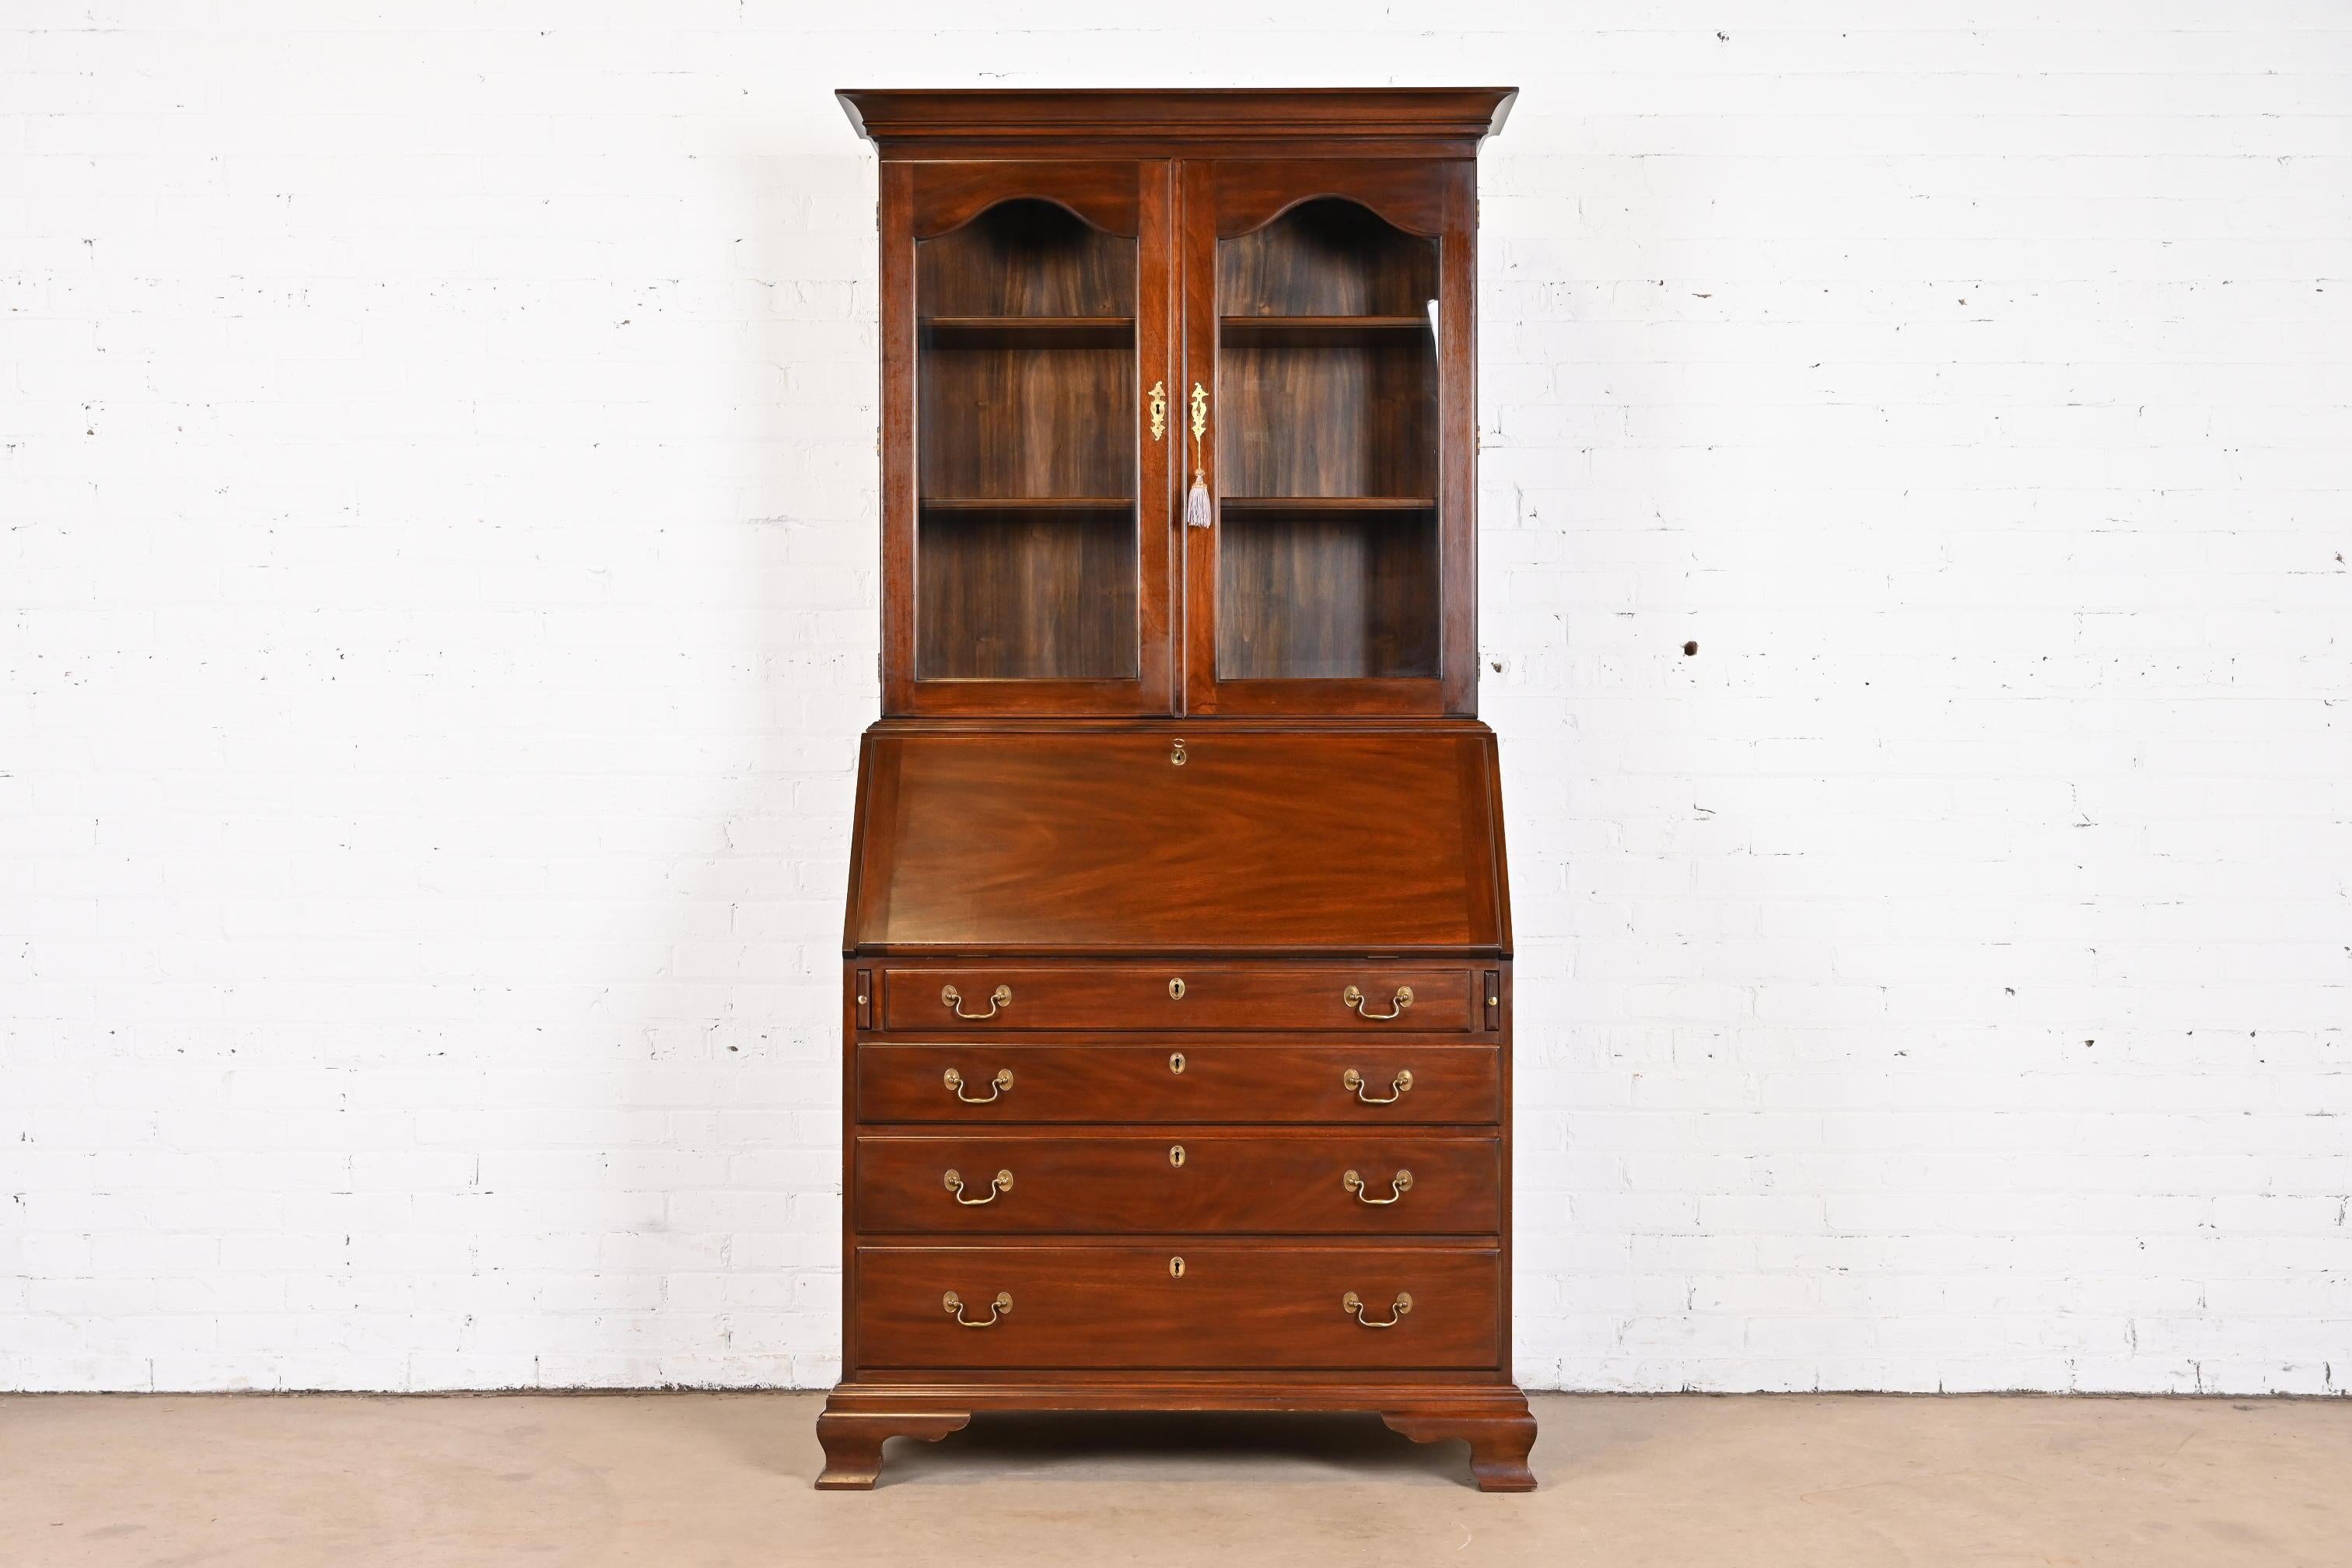 A gorgeous Georgian or Chippendale style bureau with drop front secretary desk and bookcase hutch top

By Henkel Harris

USA, Circa 1977

Carved solid mahogany, with glass front doors and original brass hardware. Cabinet locks, and original